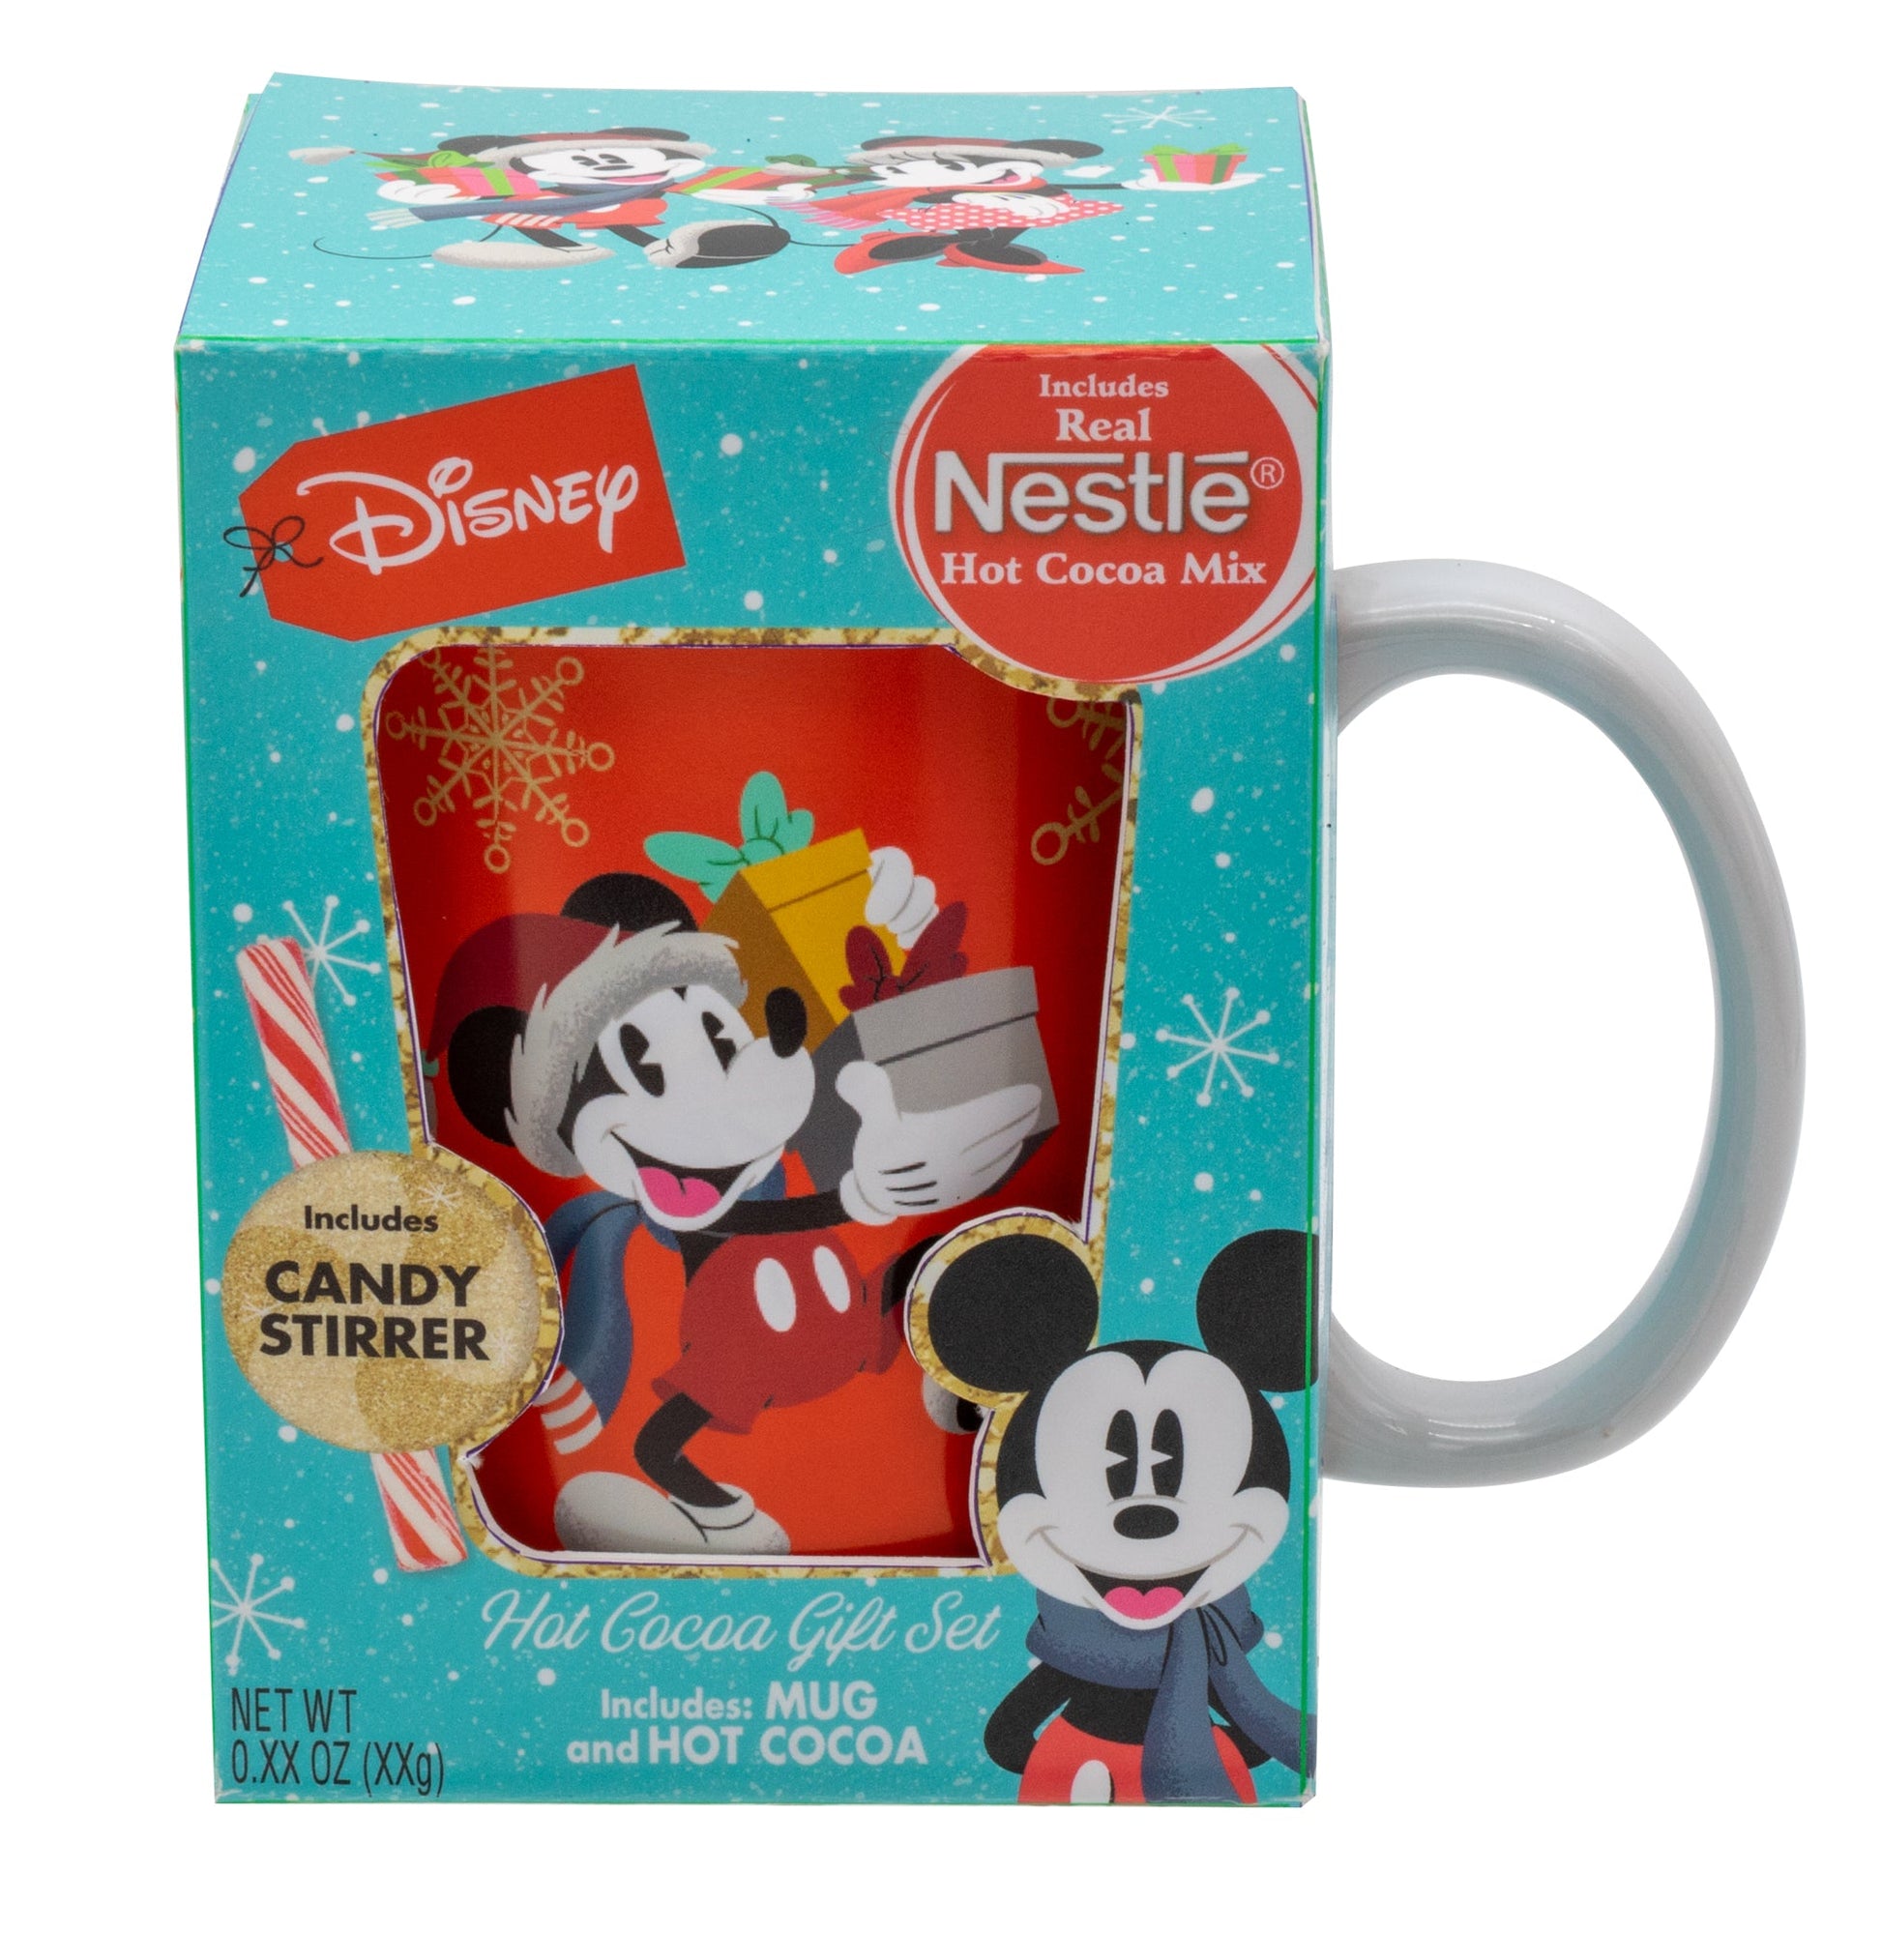 Show Off Your Morning Disney Side With New Mugs Coming to Disney